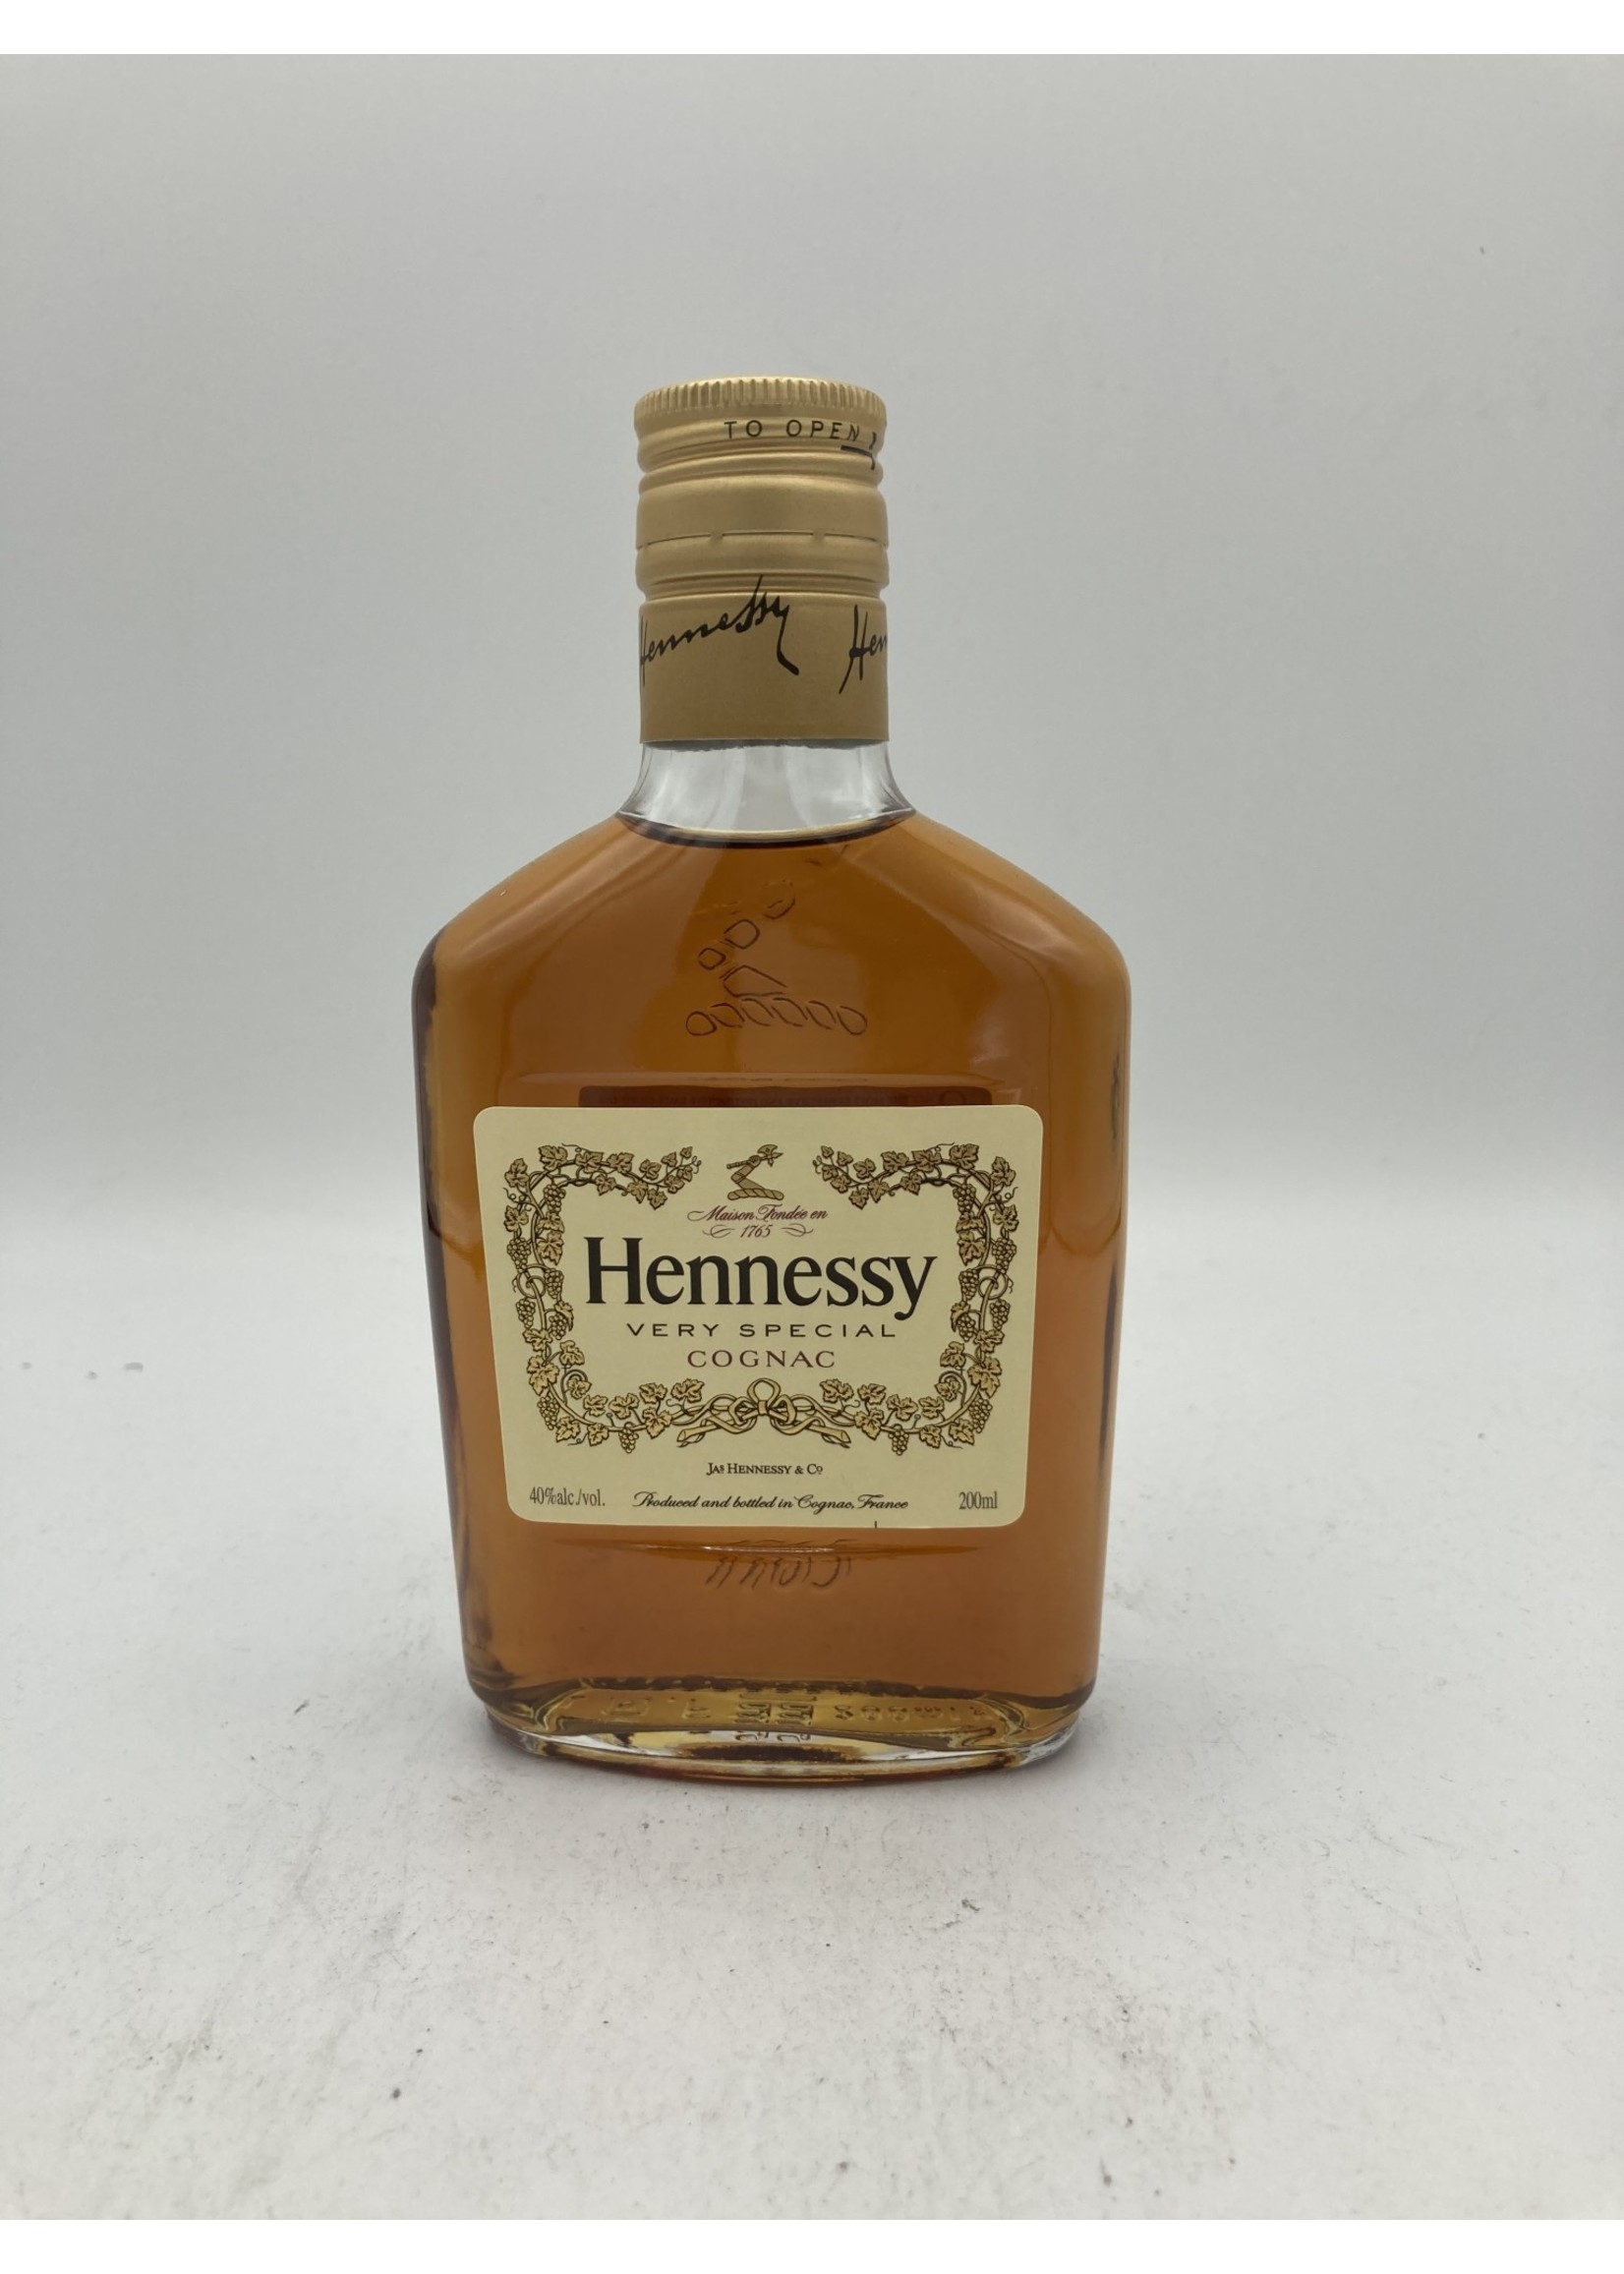 HENNESSY Hennessy cognac very special 40% abv 80 proof 200ml